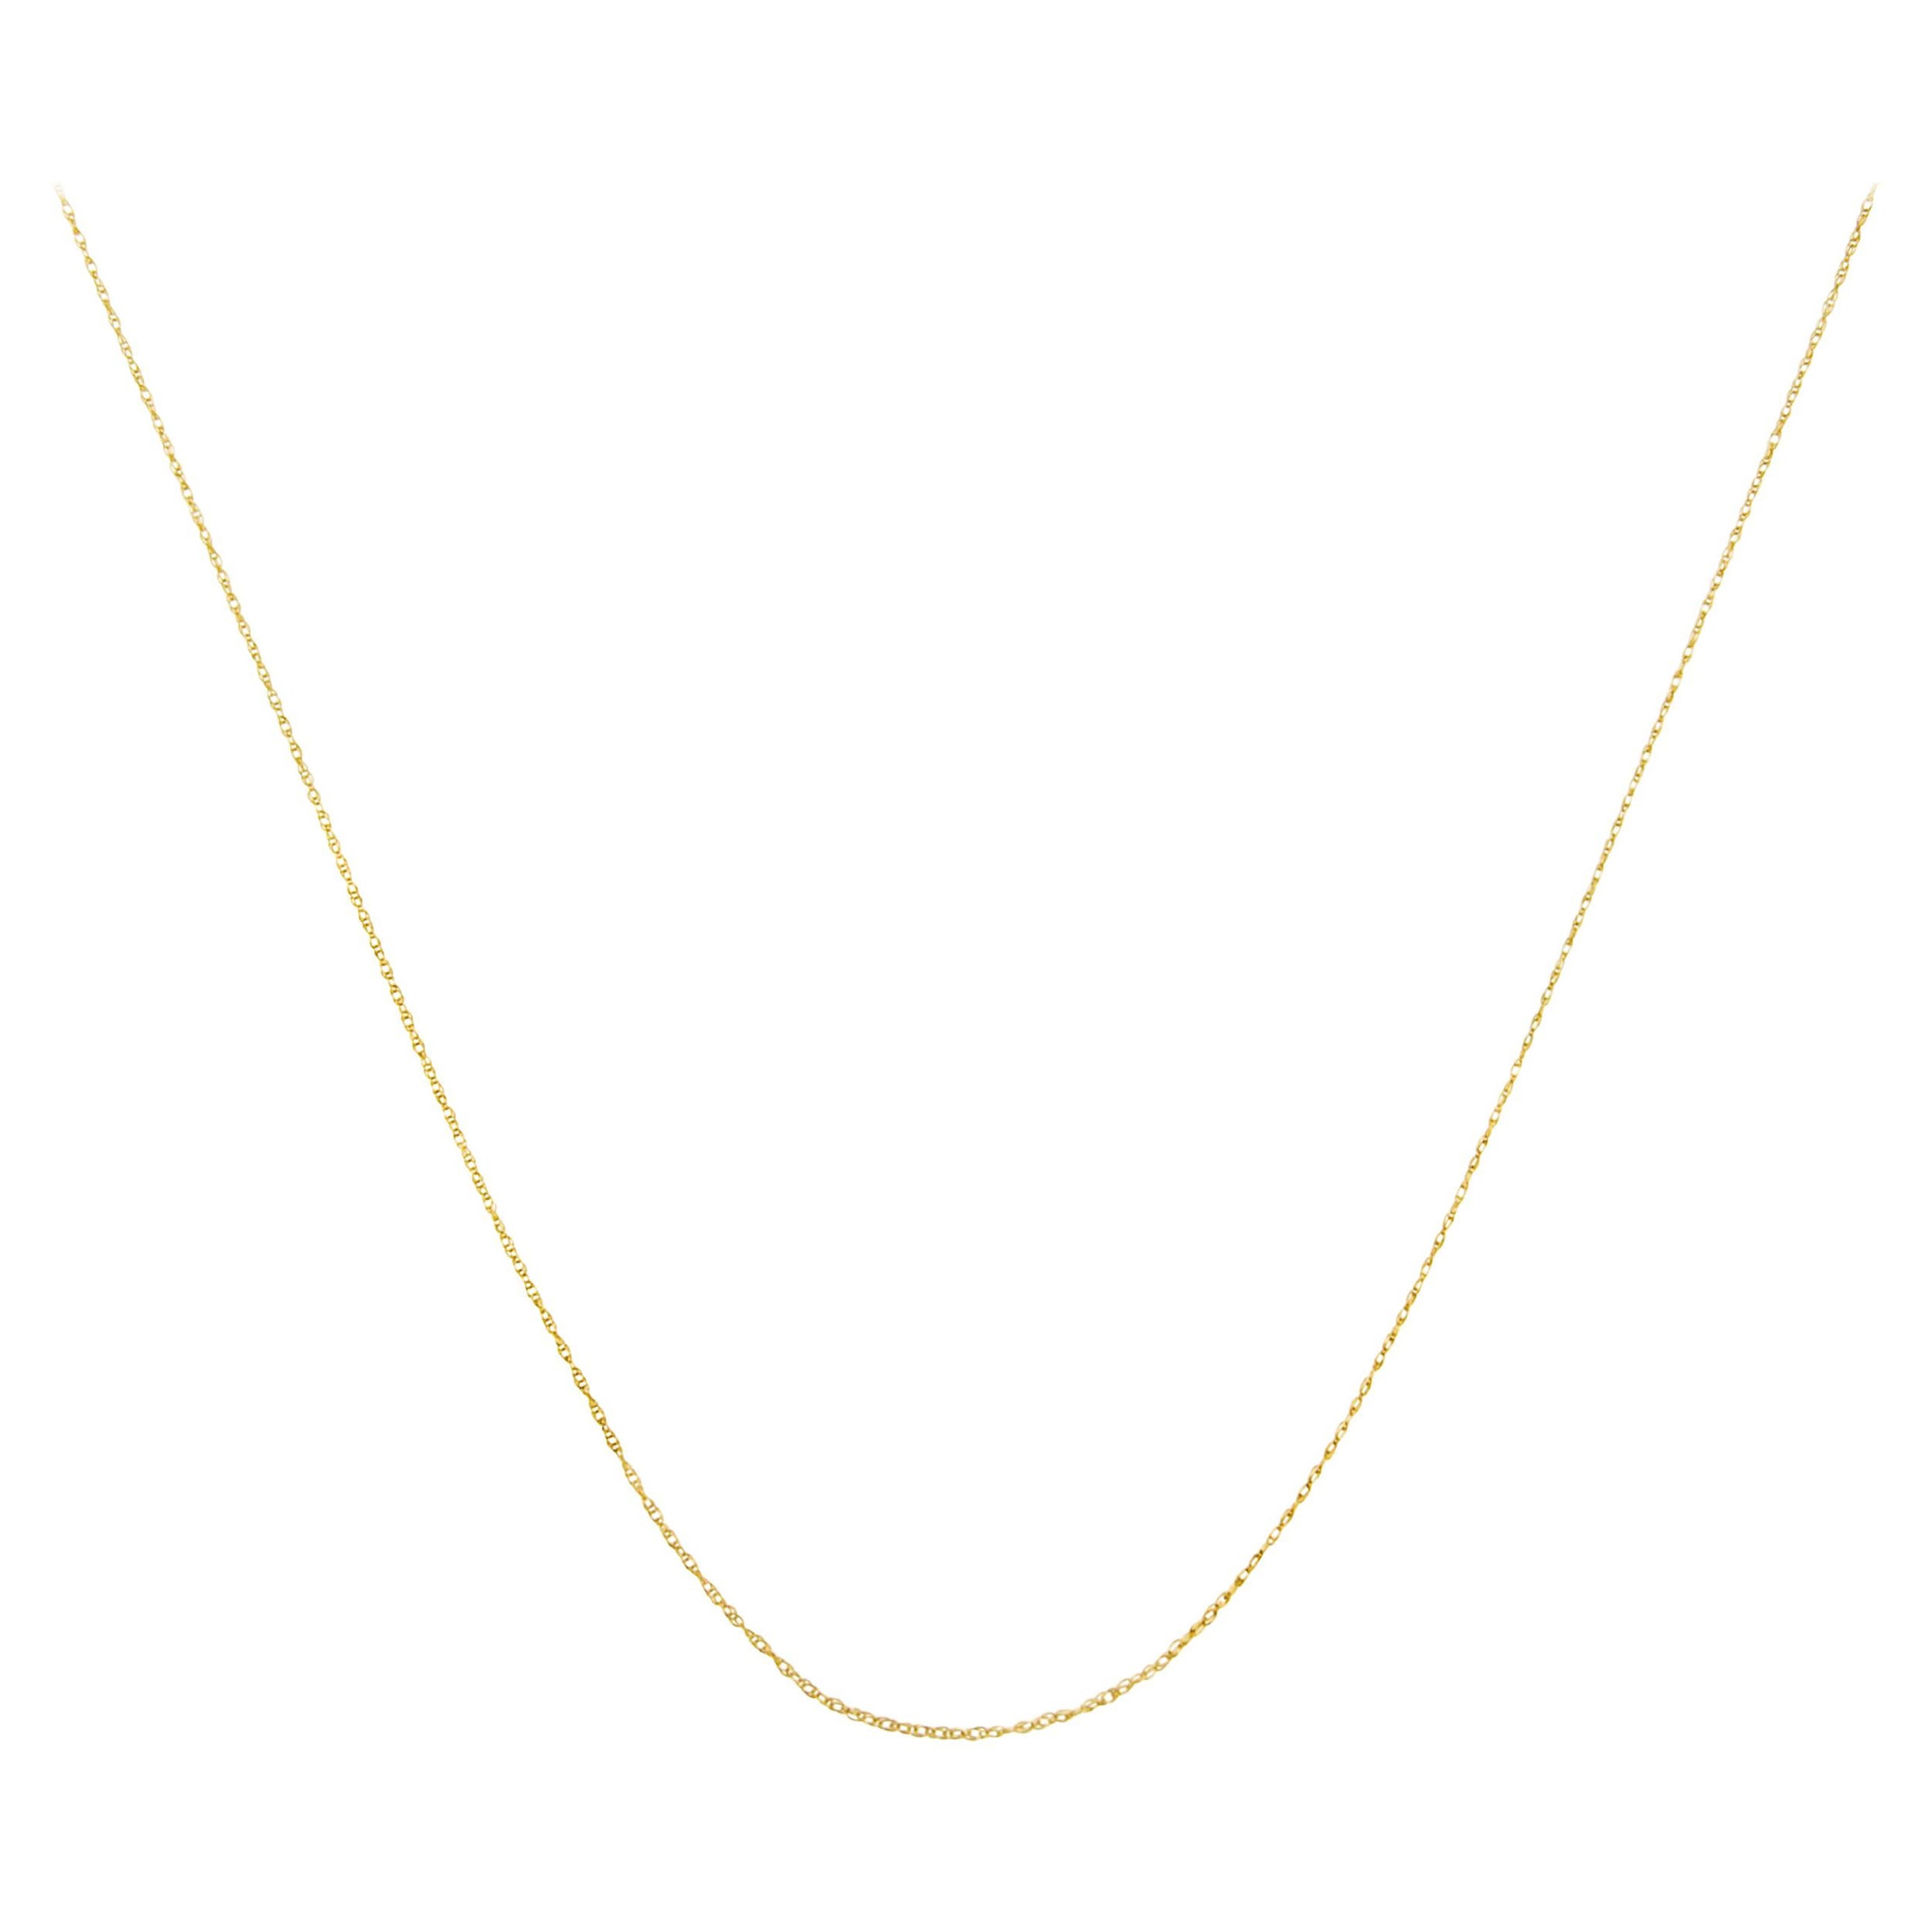 Unisex Solid 10K Yellow Gold 0.5 MM Slim and Dainty Rope Chain Necklace